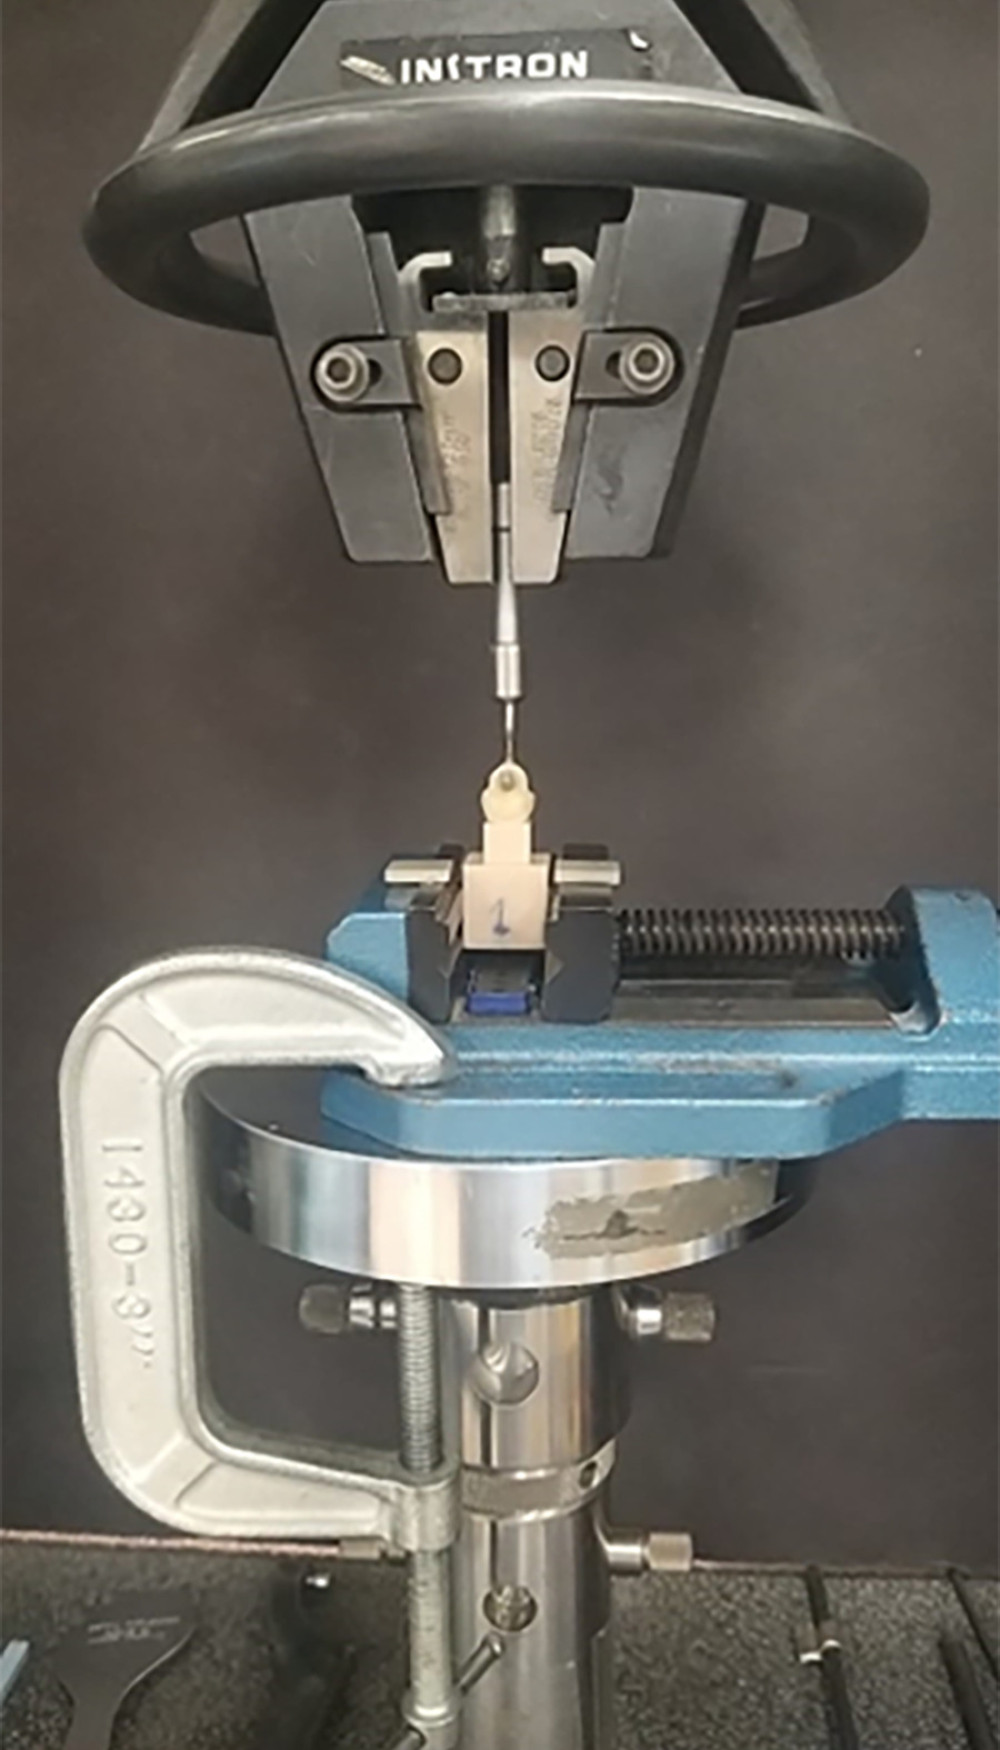 The universal testing machine demonstrates the connection of the test samples for the pull-off test, where the handles of the zirconia crowns are positioned to align with the sample handle in a perpendicular manner to the direction of the pulling force. The image was captured using a Canon EOS 700D digital single-lens reflex camera equipped with a 100-mm macro lens, either with or without a ring flash.